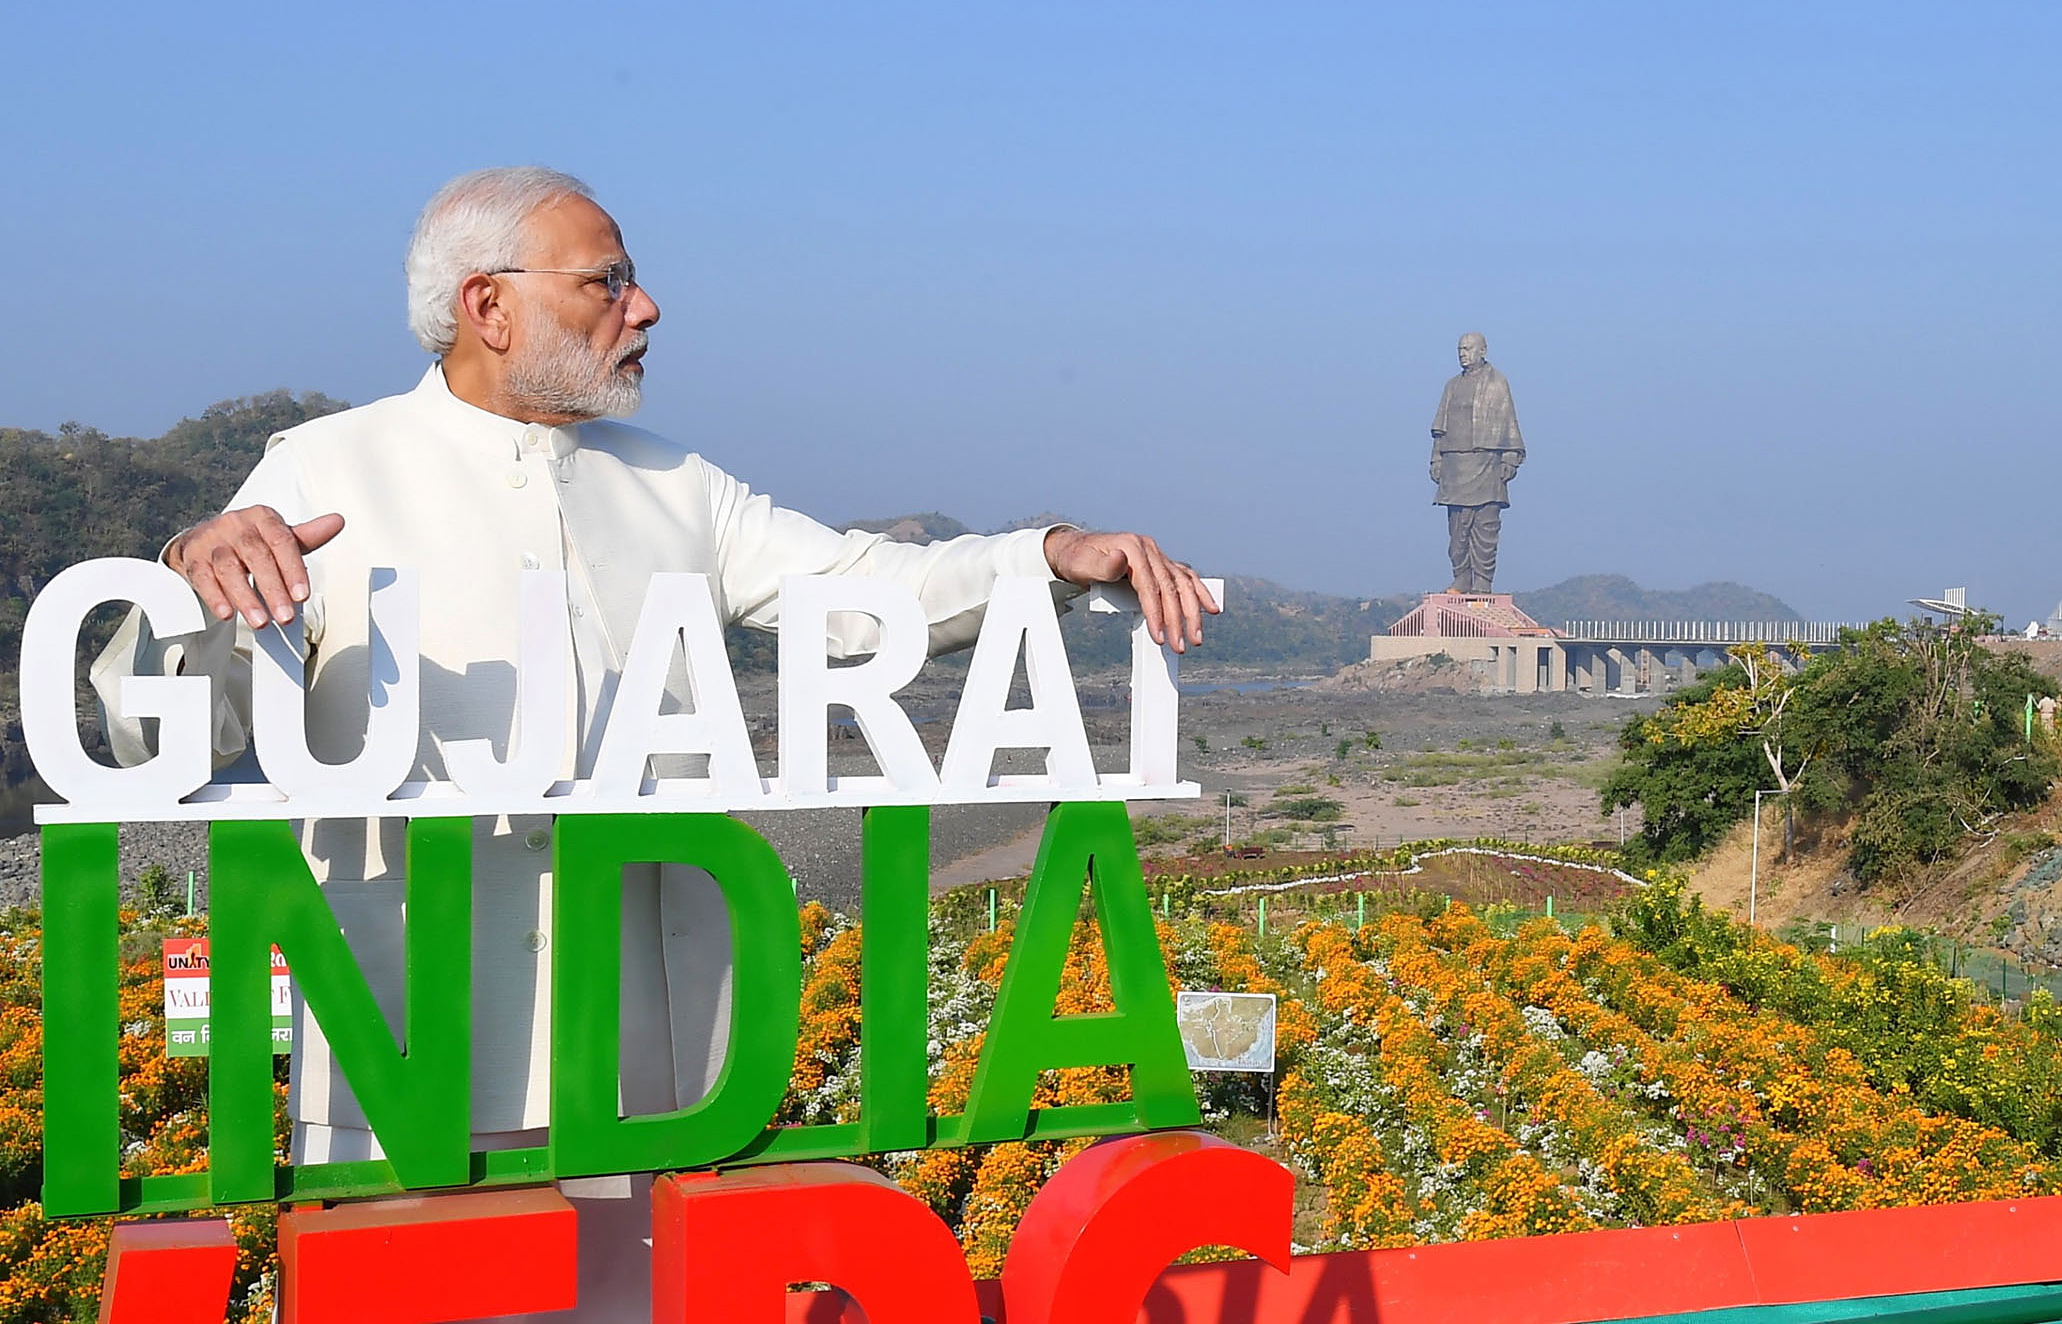 epa07132435 A handout photo made available by the Indian Press Information Bureau (PIB) on 31 October 2018 showing the Indian Prime Minister Narendra Modi near the newly built and inaugurated Statue of Unity, a monument dedicated to Indian independence movement leader Sardar Vallabhbhai Patel, near Narmada Dam in Gujarat, India, 31 October 2018. Prime Minister Modi inaugurated the 182 metres or 597.11 feet statue which is the tallest in the world which cost 430 million US dollars to construct.  EPA/PRESS INFORMATION BUREAU PIB / HANDOUT  HANDOUT EDITORIAL USE ONLY/NO SALES